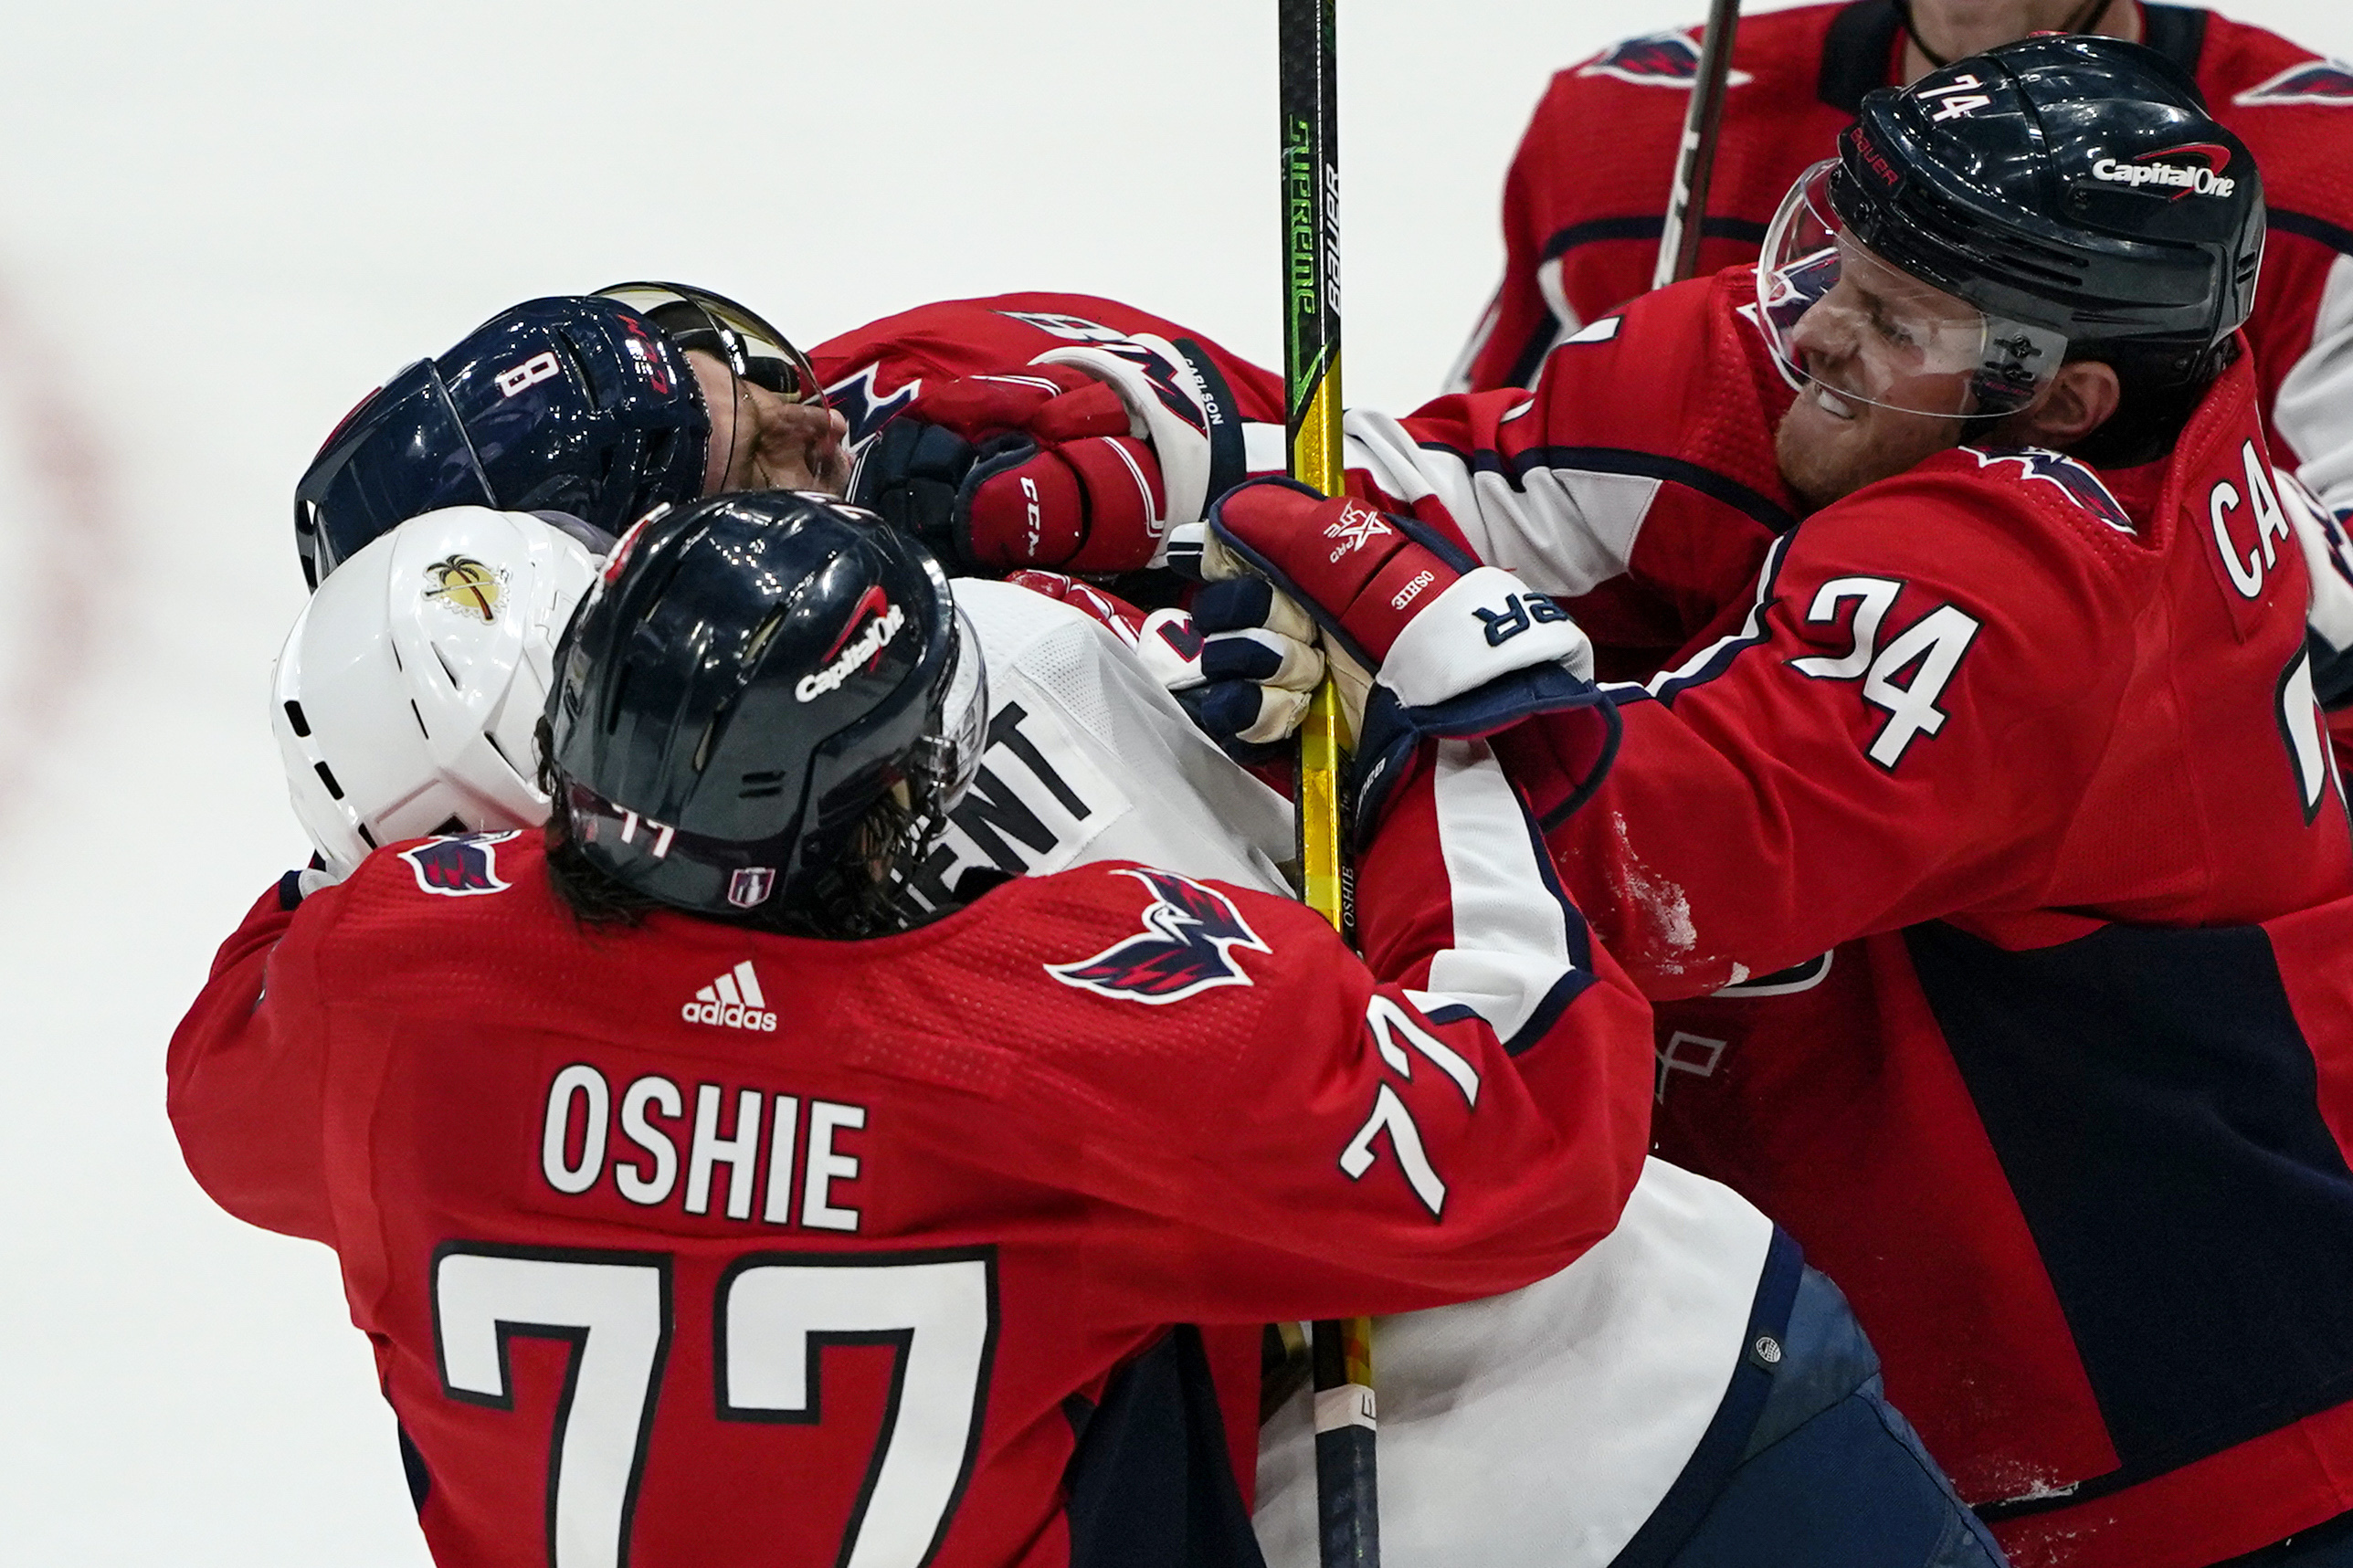 Capitals rout Panthers 6-1 in Game 3 to take 2-1 series lead